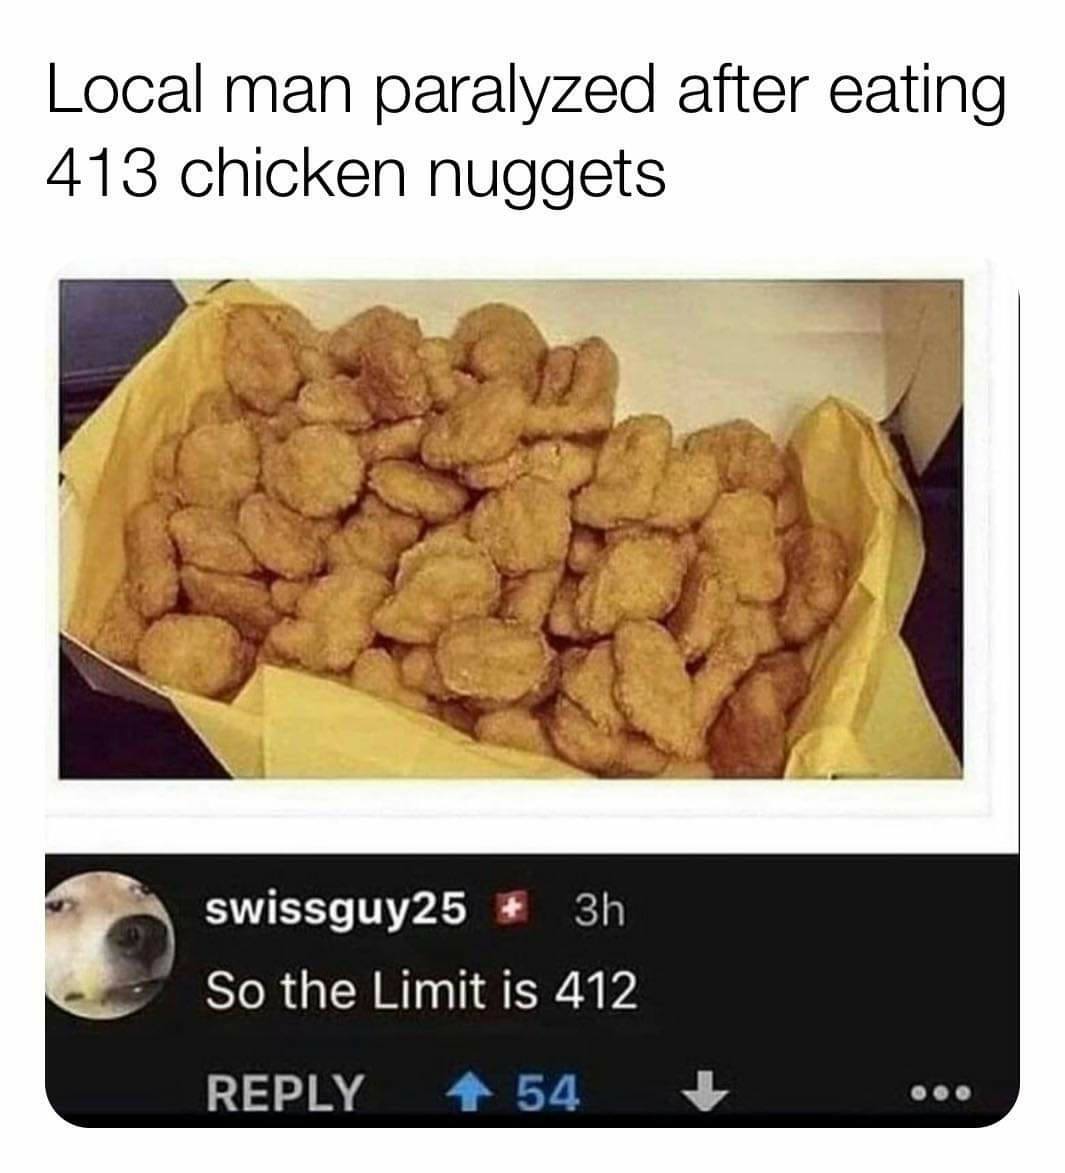 funny memes - hilarious memes - man dies after eating chicken nuggets - Local man paralyzed after eating 413 chicken nuggets swissguy25 3h So the Limit is 412 54